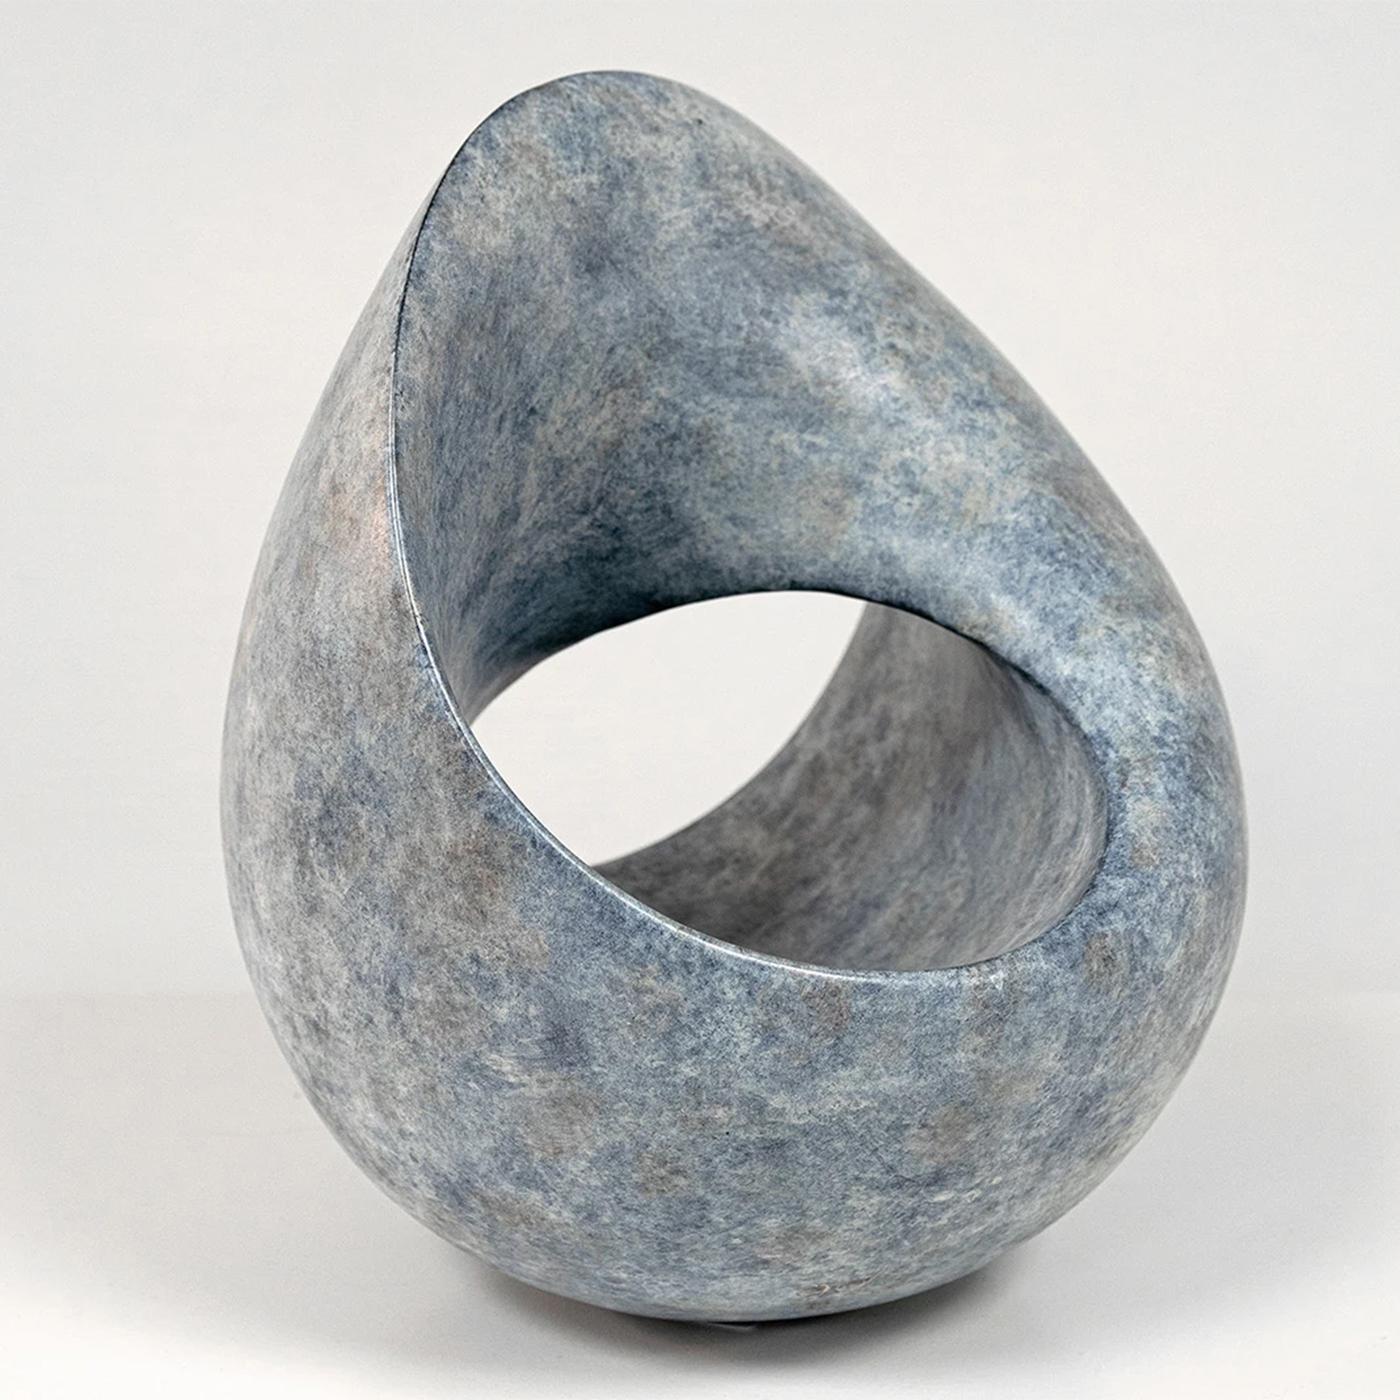 Sculpture no end blue bronze 
all in solid bronze in blue finish.